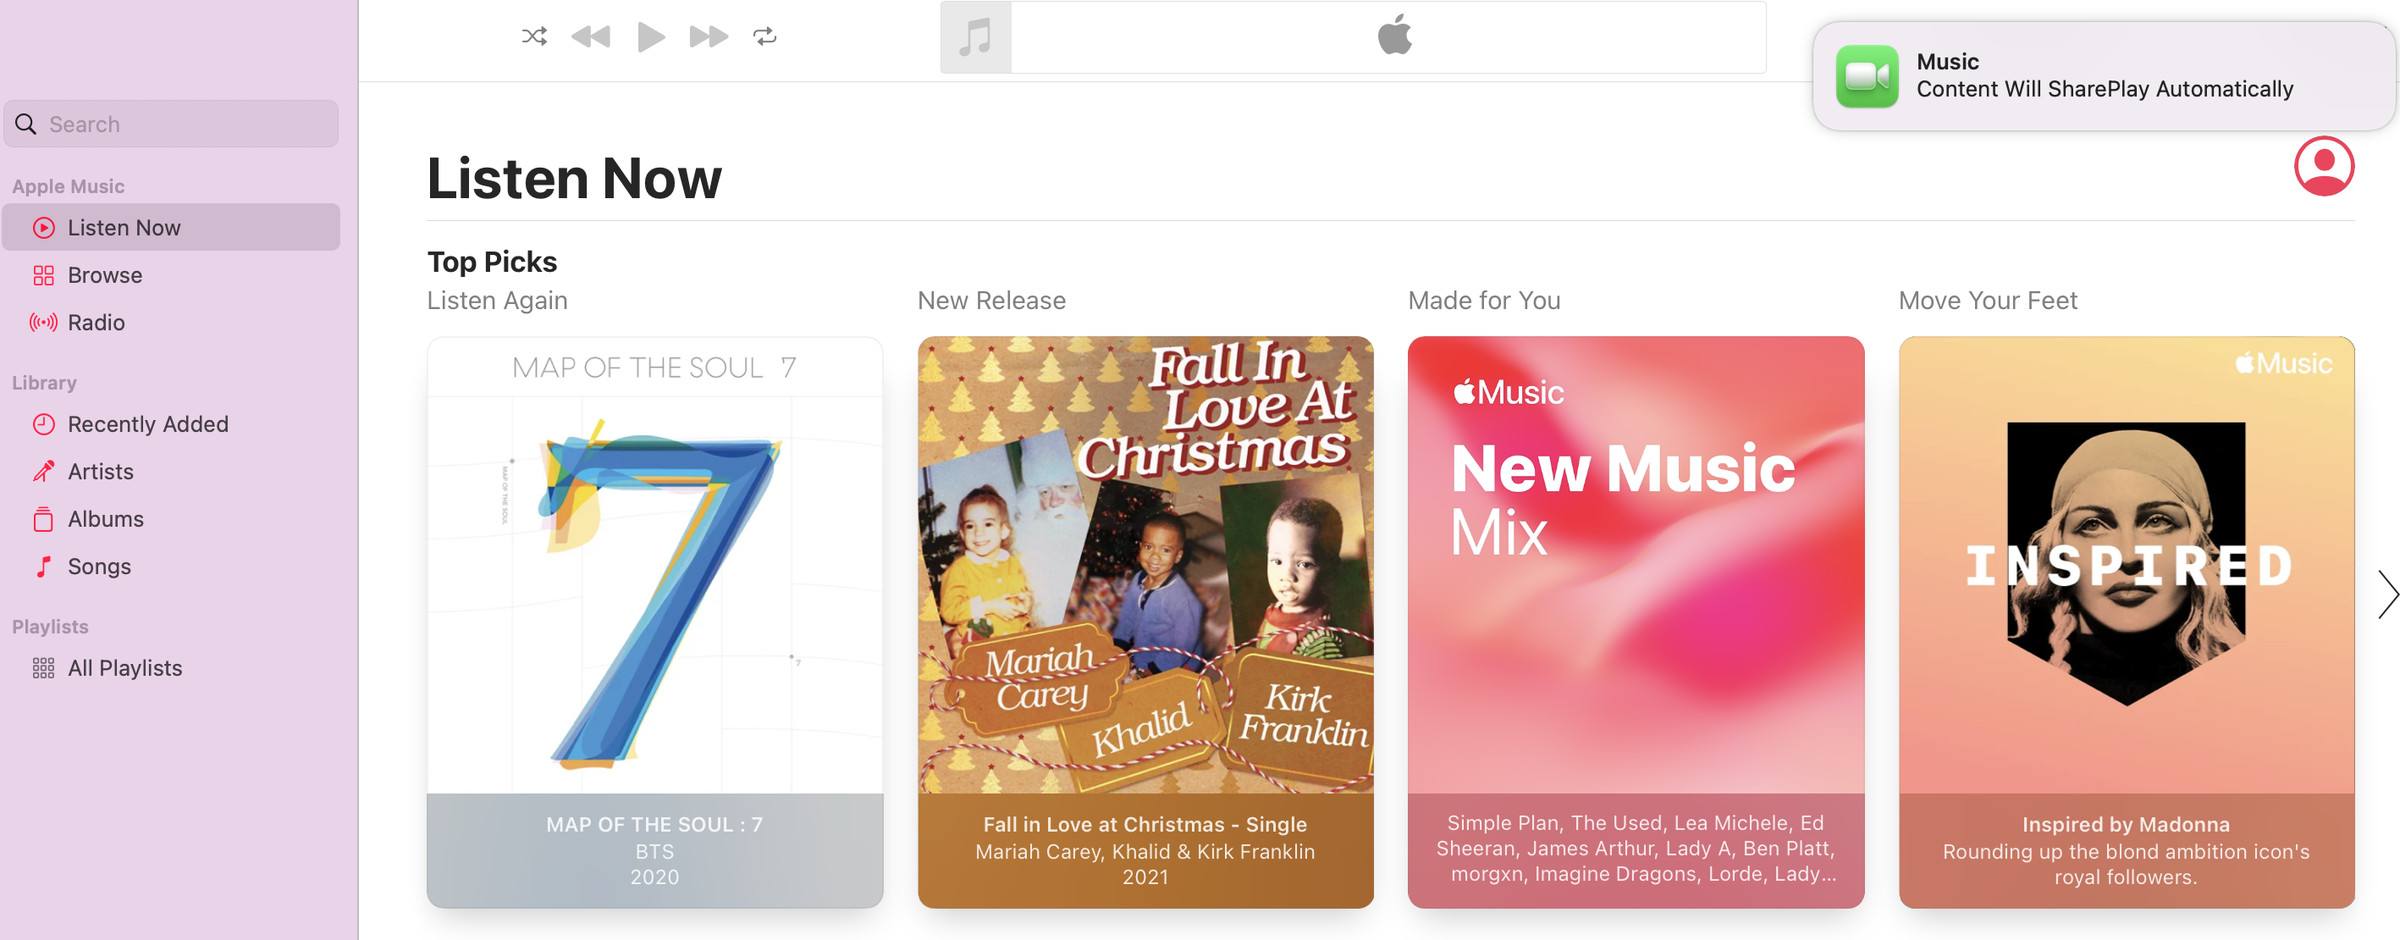 A screenshot of an Apple Music interface. A notification in the top right reads “Music: Content will SharePlay automatically”.